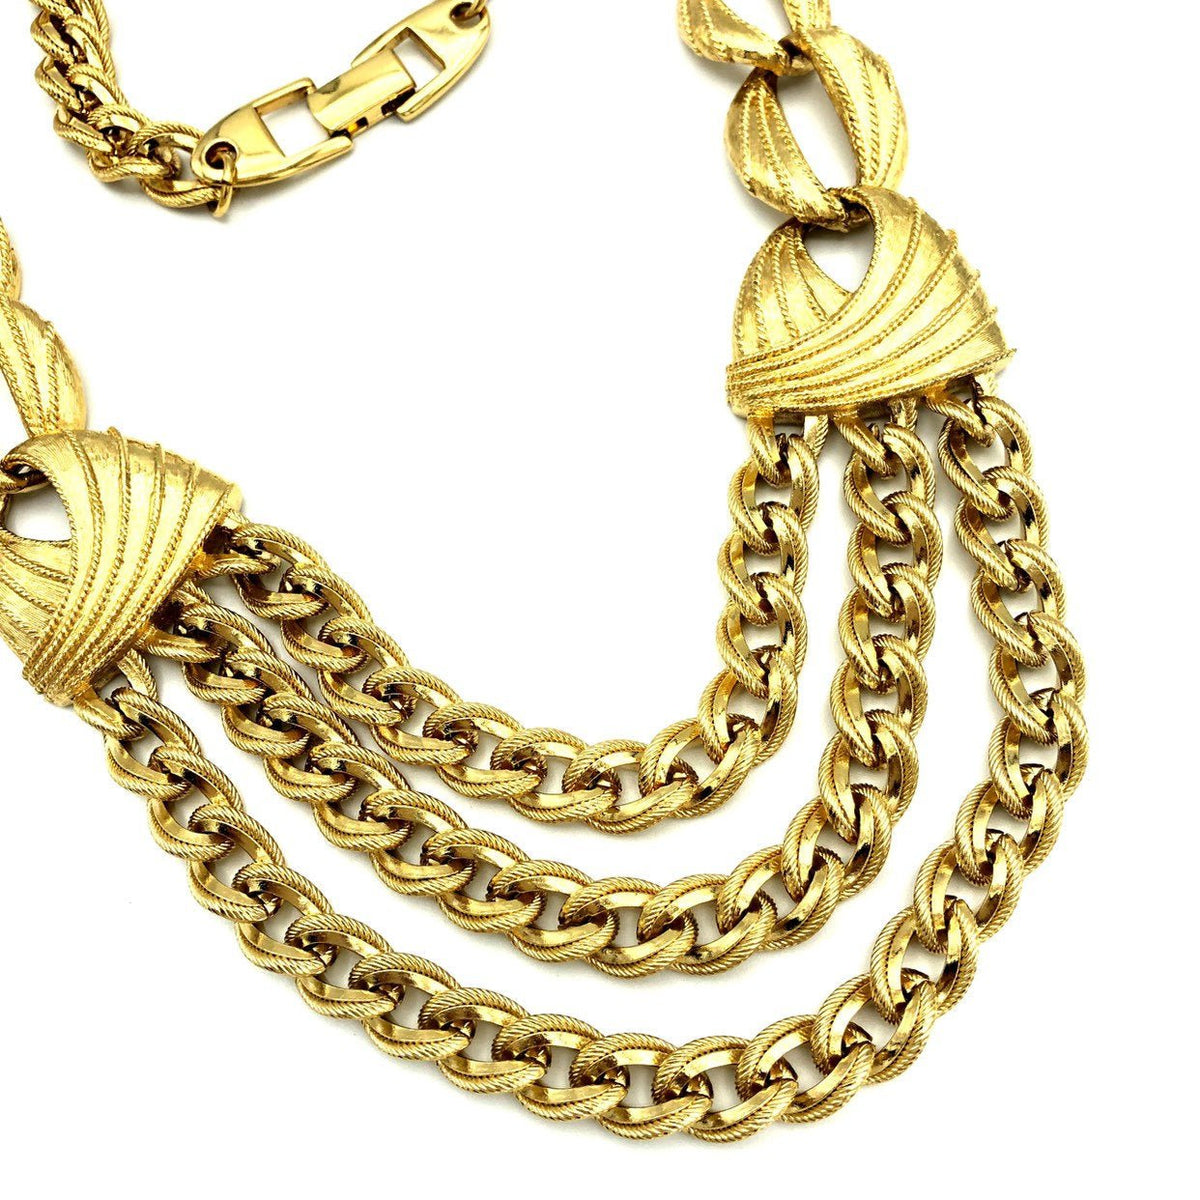 Vintage Napier Gold Chain Classic Layered Bib Necklace - 24 Wishes Vintage Jewelry